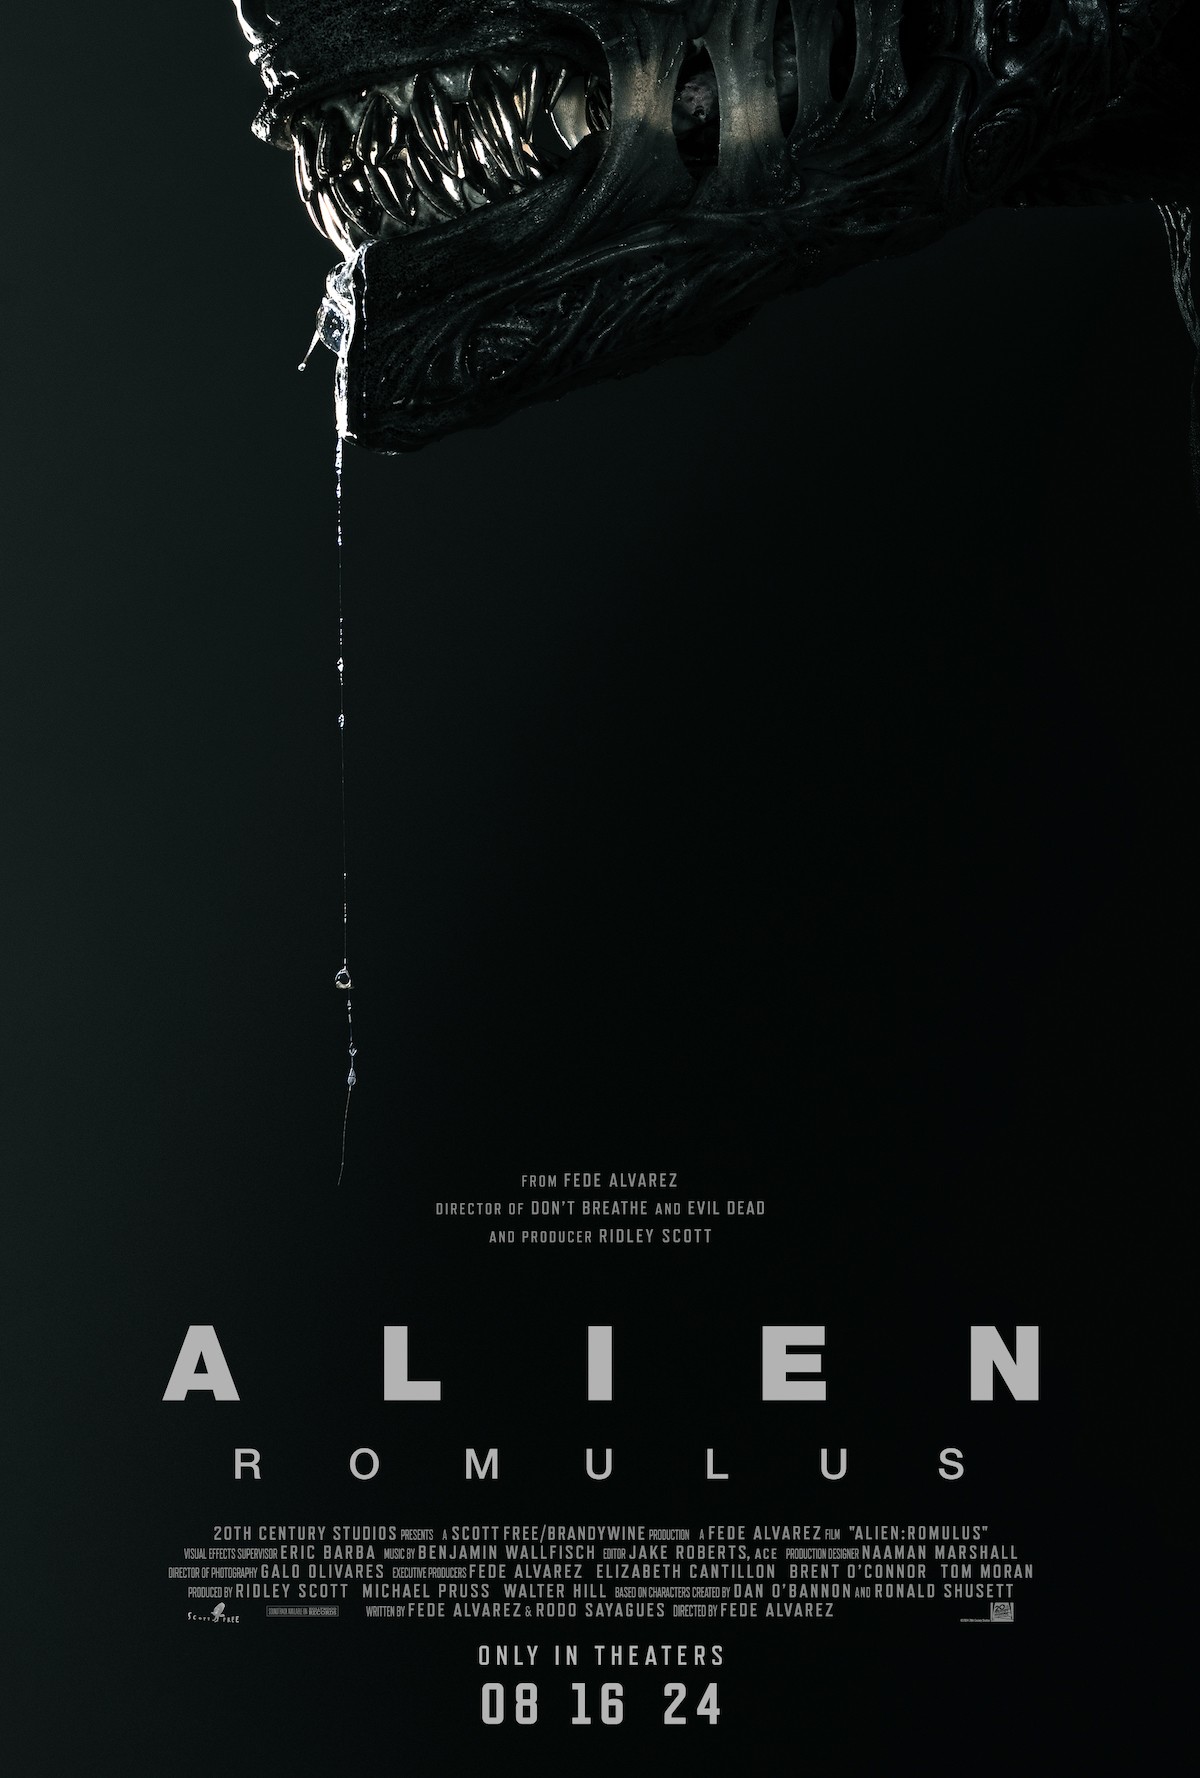 <p>This follow-up to the iconic <em>Alien</em> franchise is for sci-fi and action lovers! The summer movie follows a group of young space colonizers on a mission to explore an abandoned space station. But the deeper the go, they closer they get to the most terrifying life form in the whole universe.</p><p><em>Alien: Romulus hits theaters August 16, 2024 and stars Cailee Spaeny, David Jonsson, Archie Renaux, Isabela Merced, Spike Fearn, and Aileen Wu.</em></p><p>Like Brit + Co's content? <a href="https://www.msn.com/en-us/channel/source/BRITCO/sr-vid-mwh45mxjpbgutp55qr3ca3bnmhxae80xpqj0vw80yesb5g0h5q2a?cvid=6efac0aec71d460989f862c7f33ea985&ei=106">Be sure to follow us for more! </a> </p>